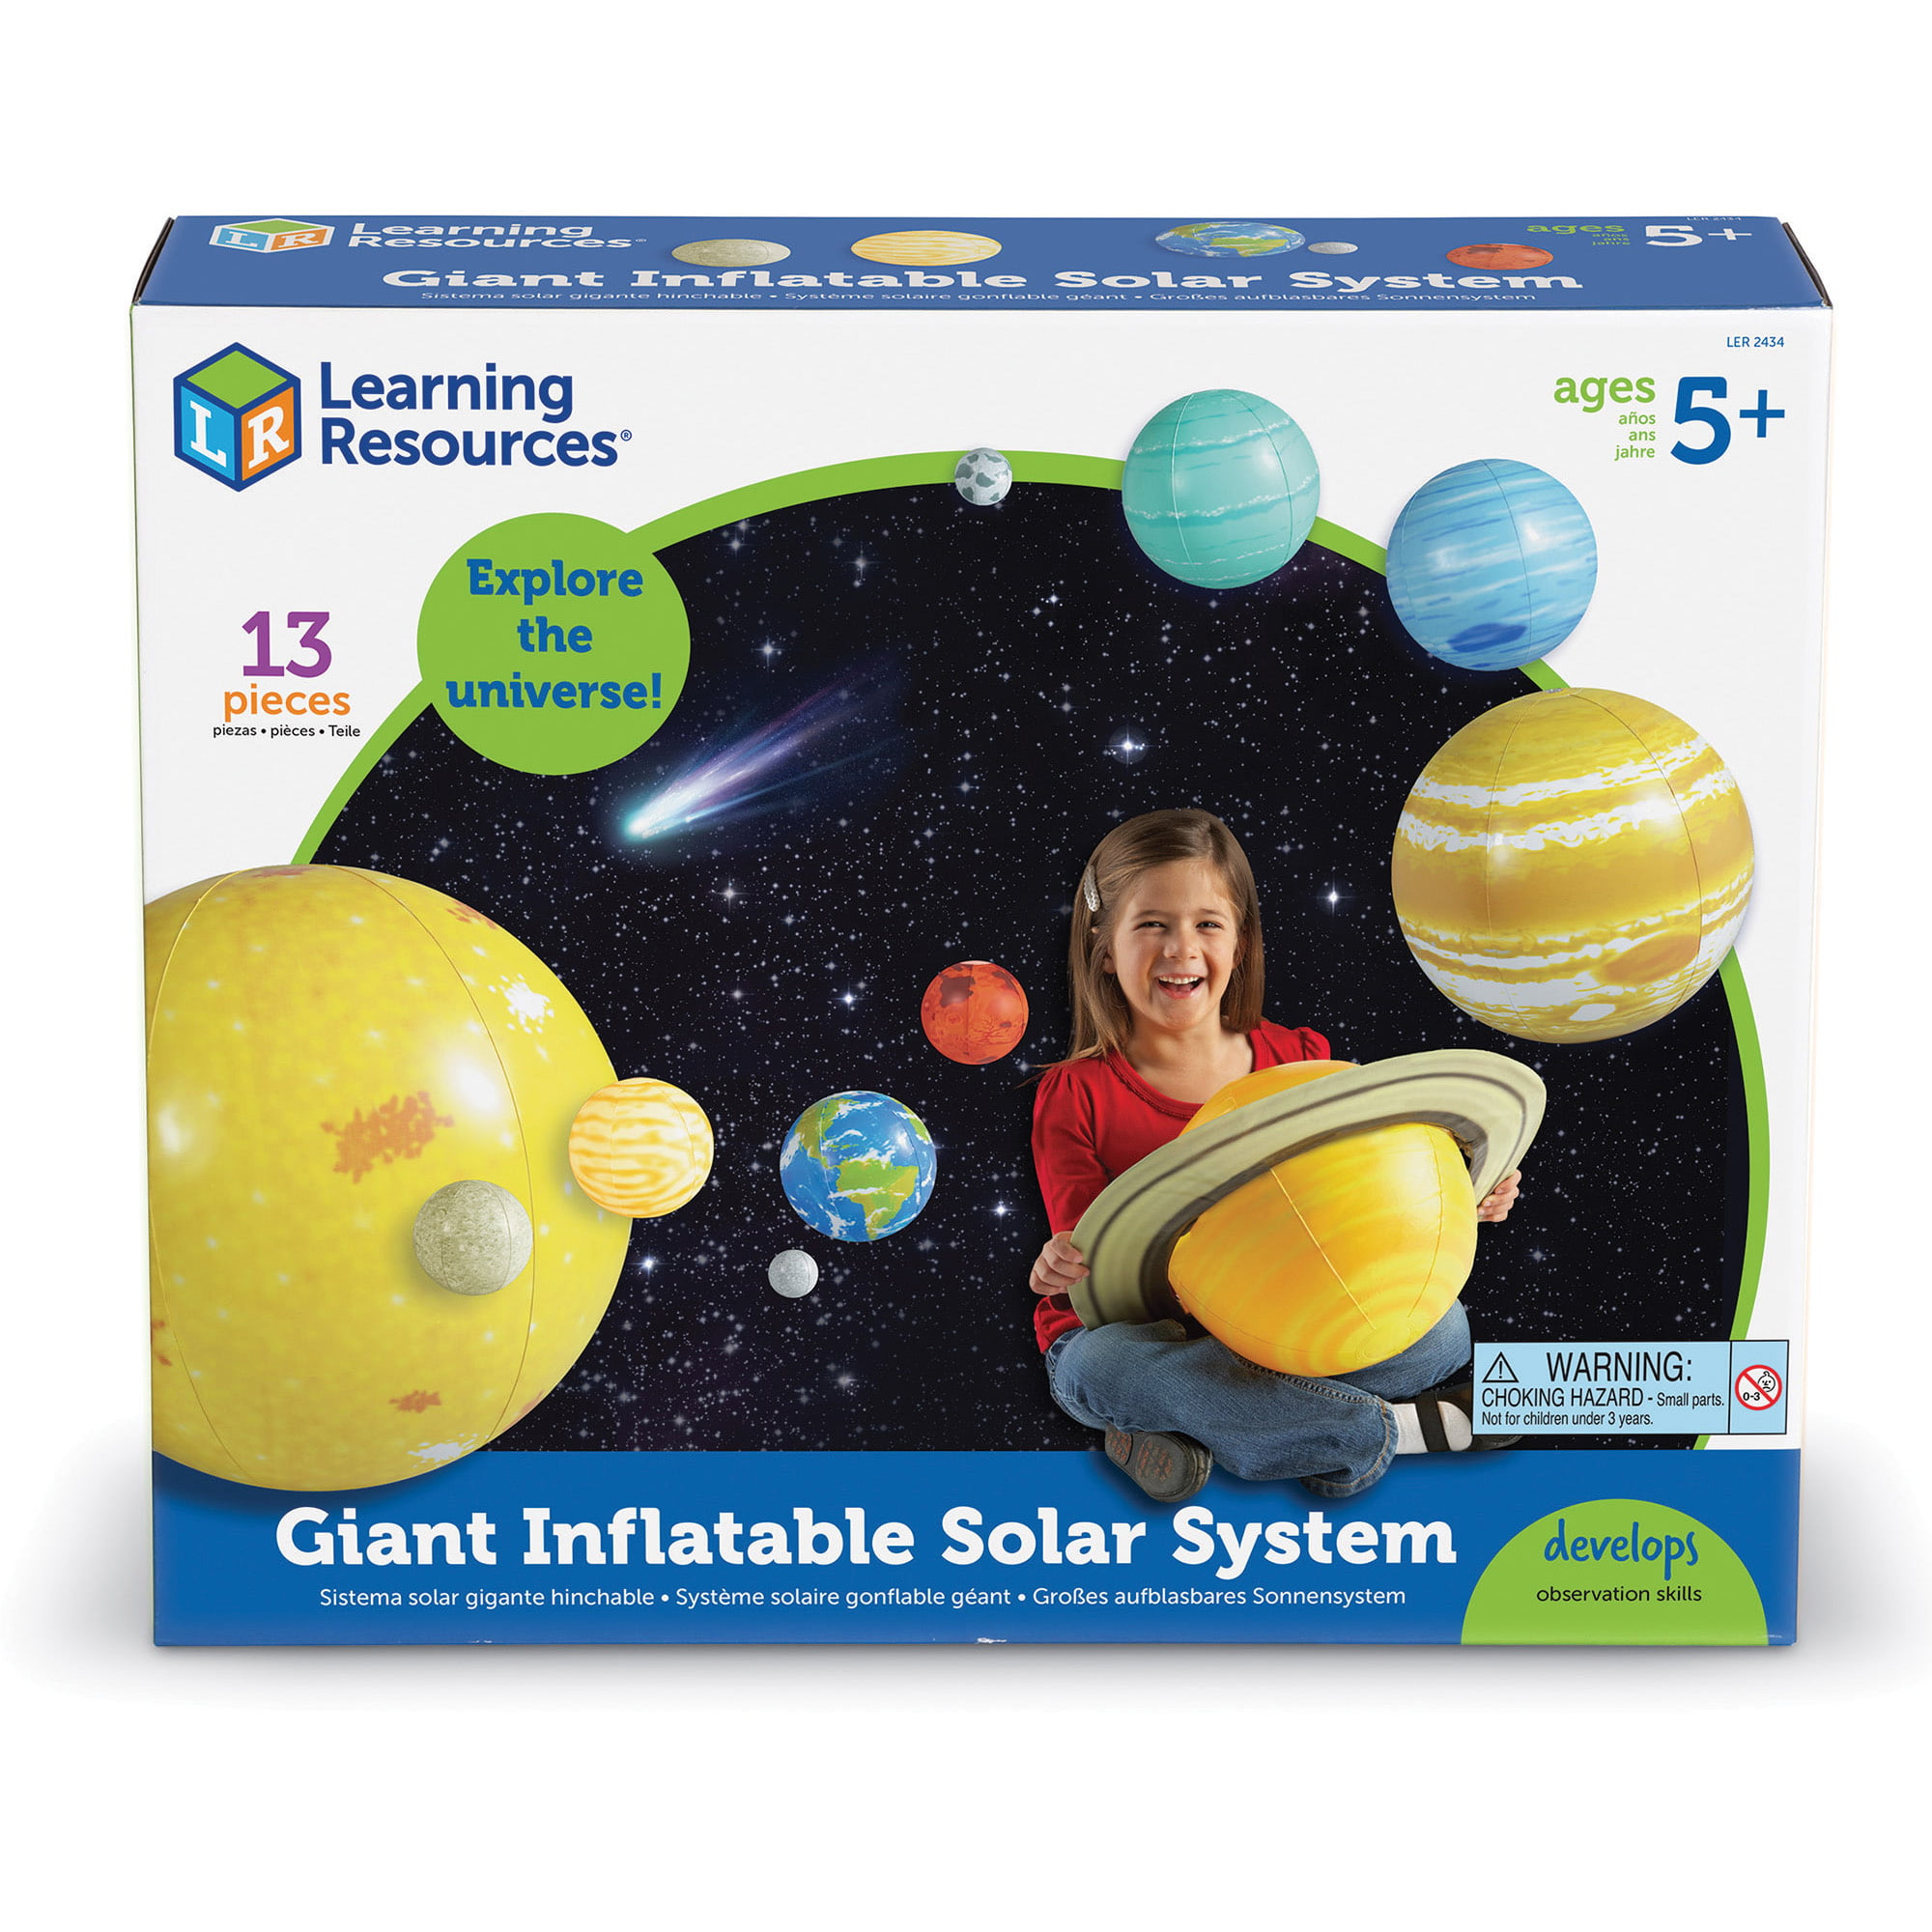 Kids Science Toys Inflatable Solar System Set Play Learn Birthday Gift Boys Girl